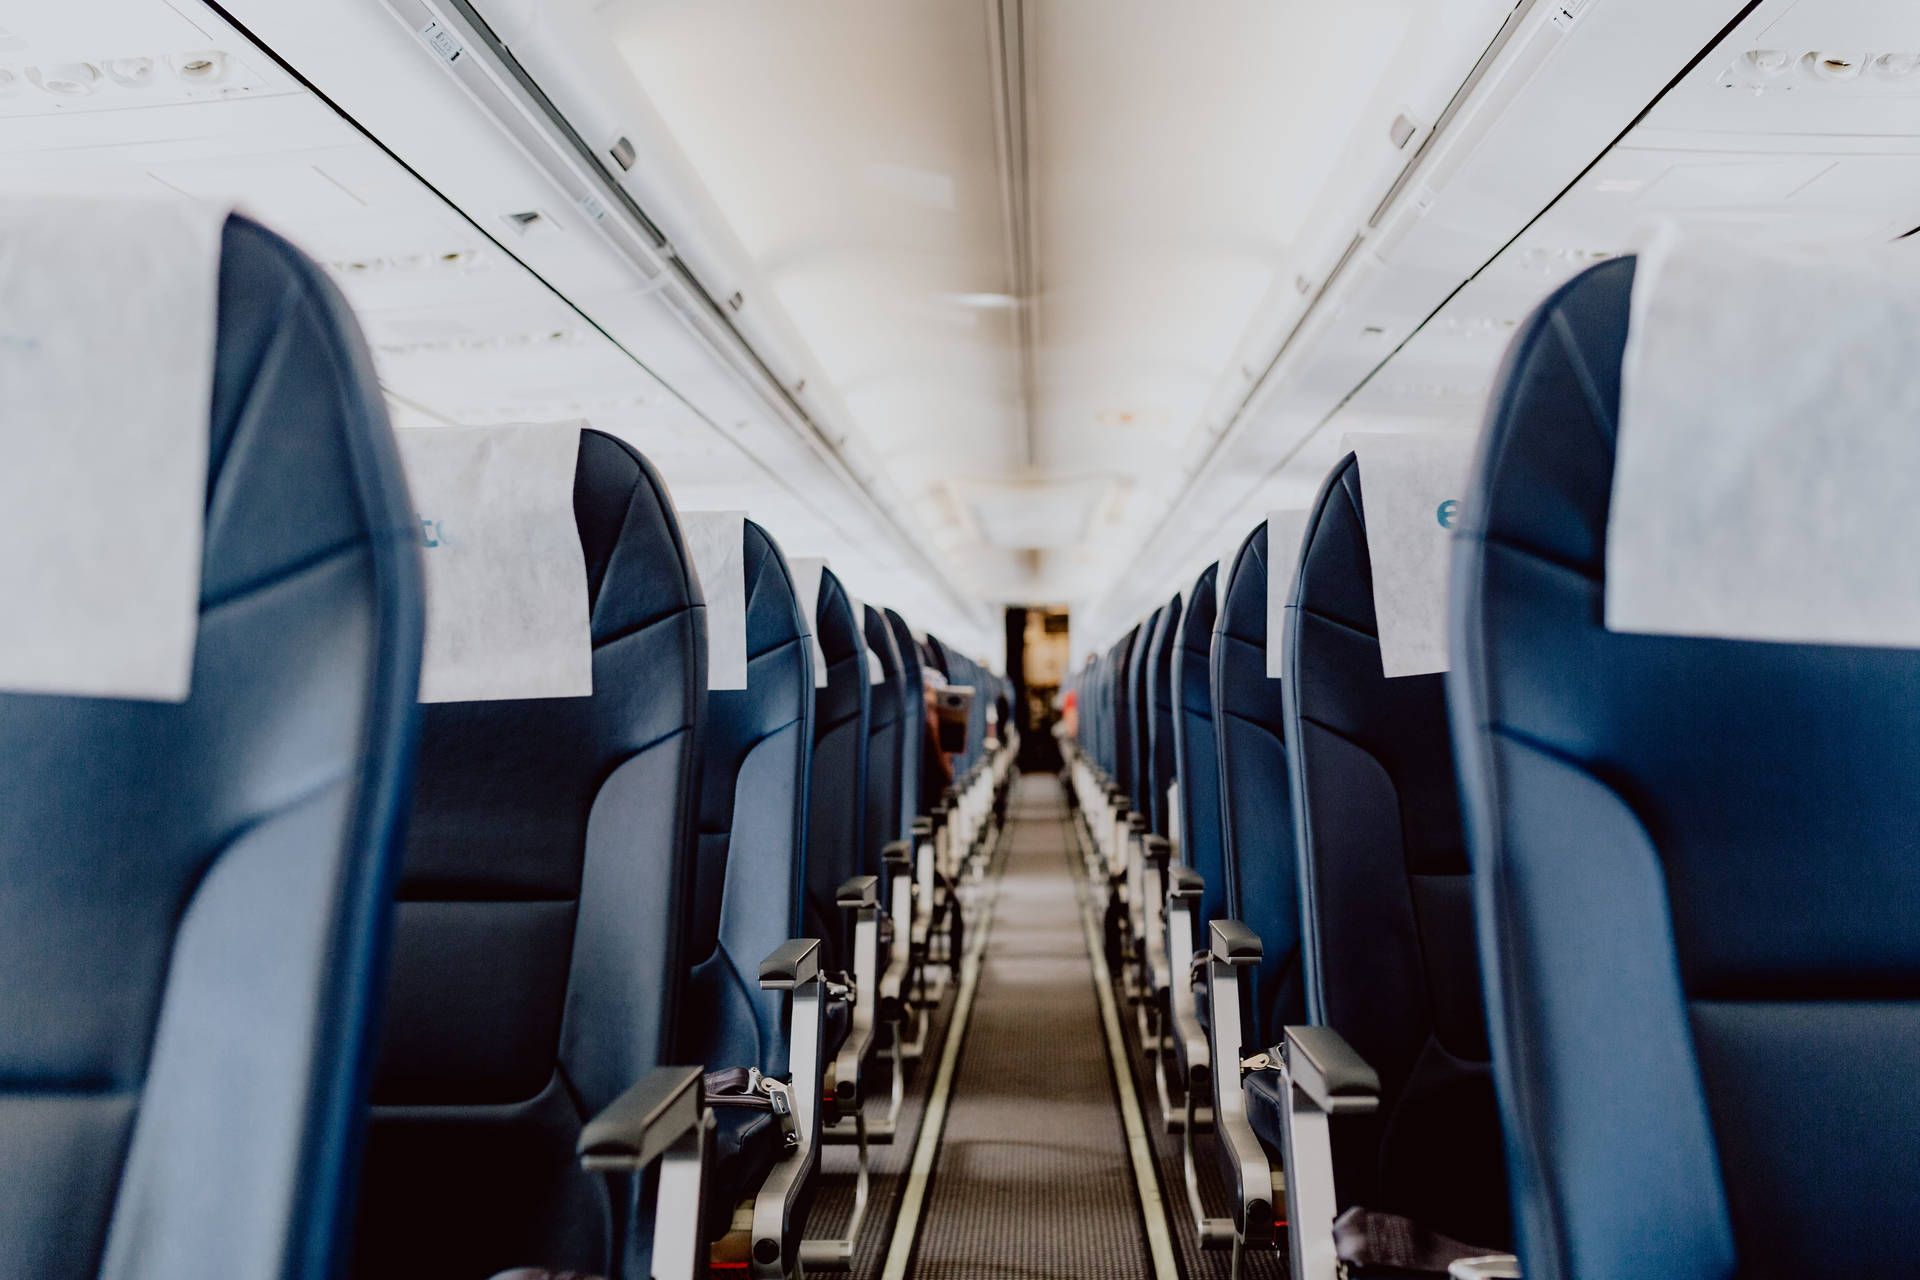 Chairs Inside Airplane 4k Background